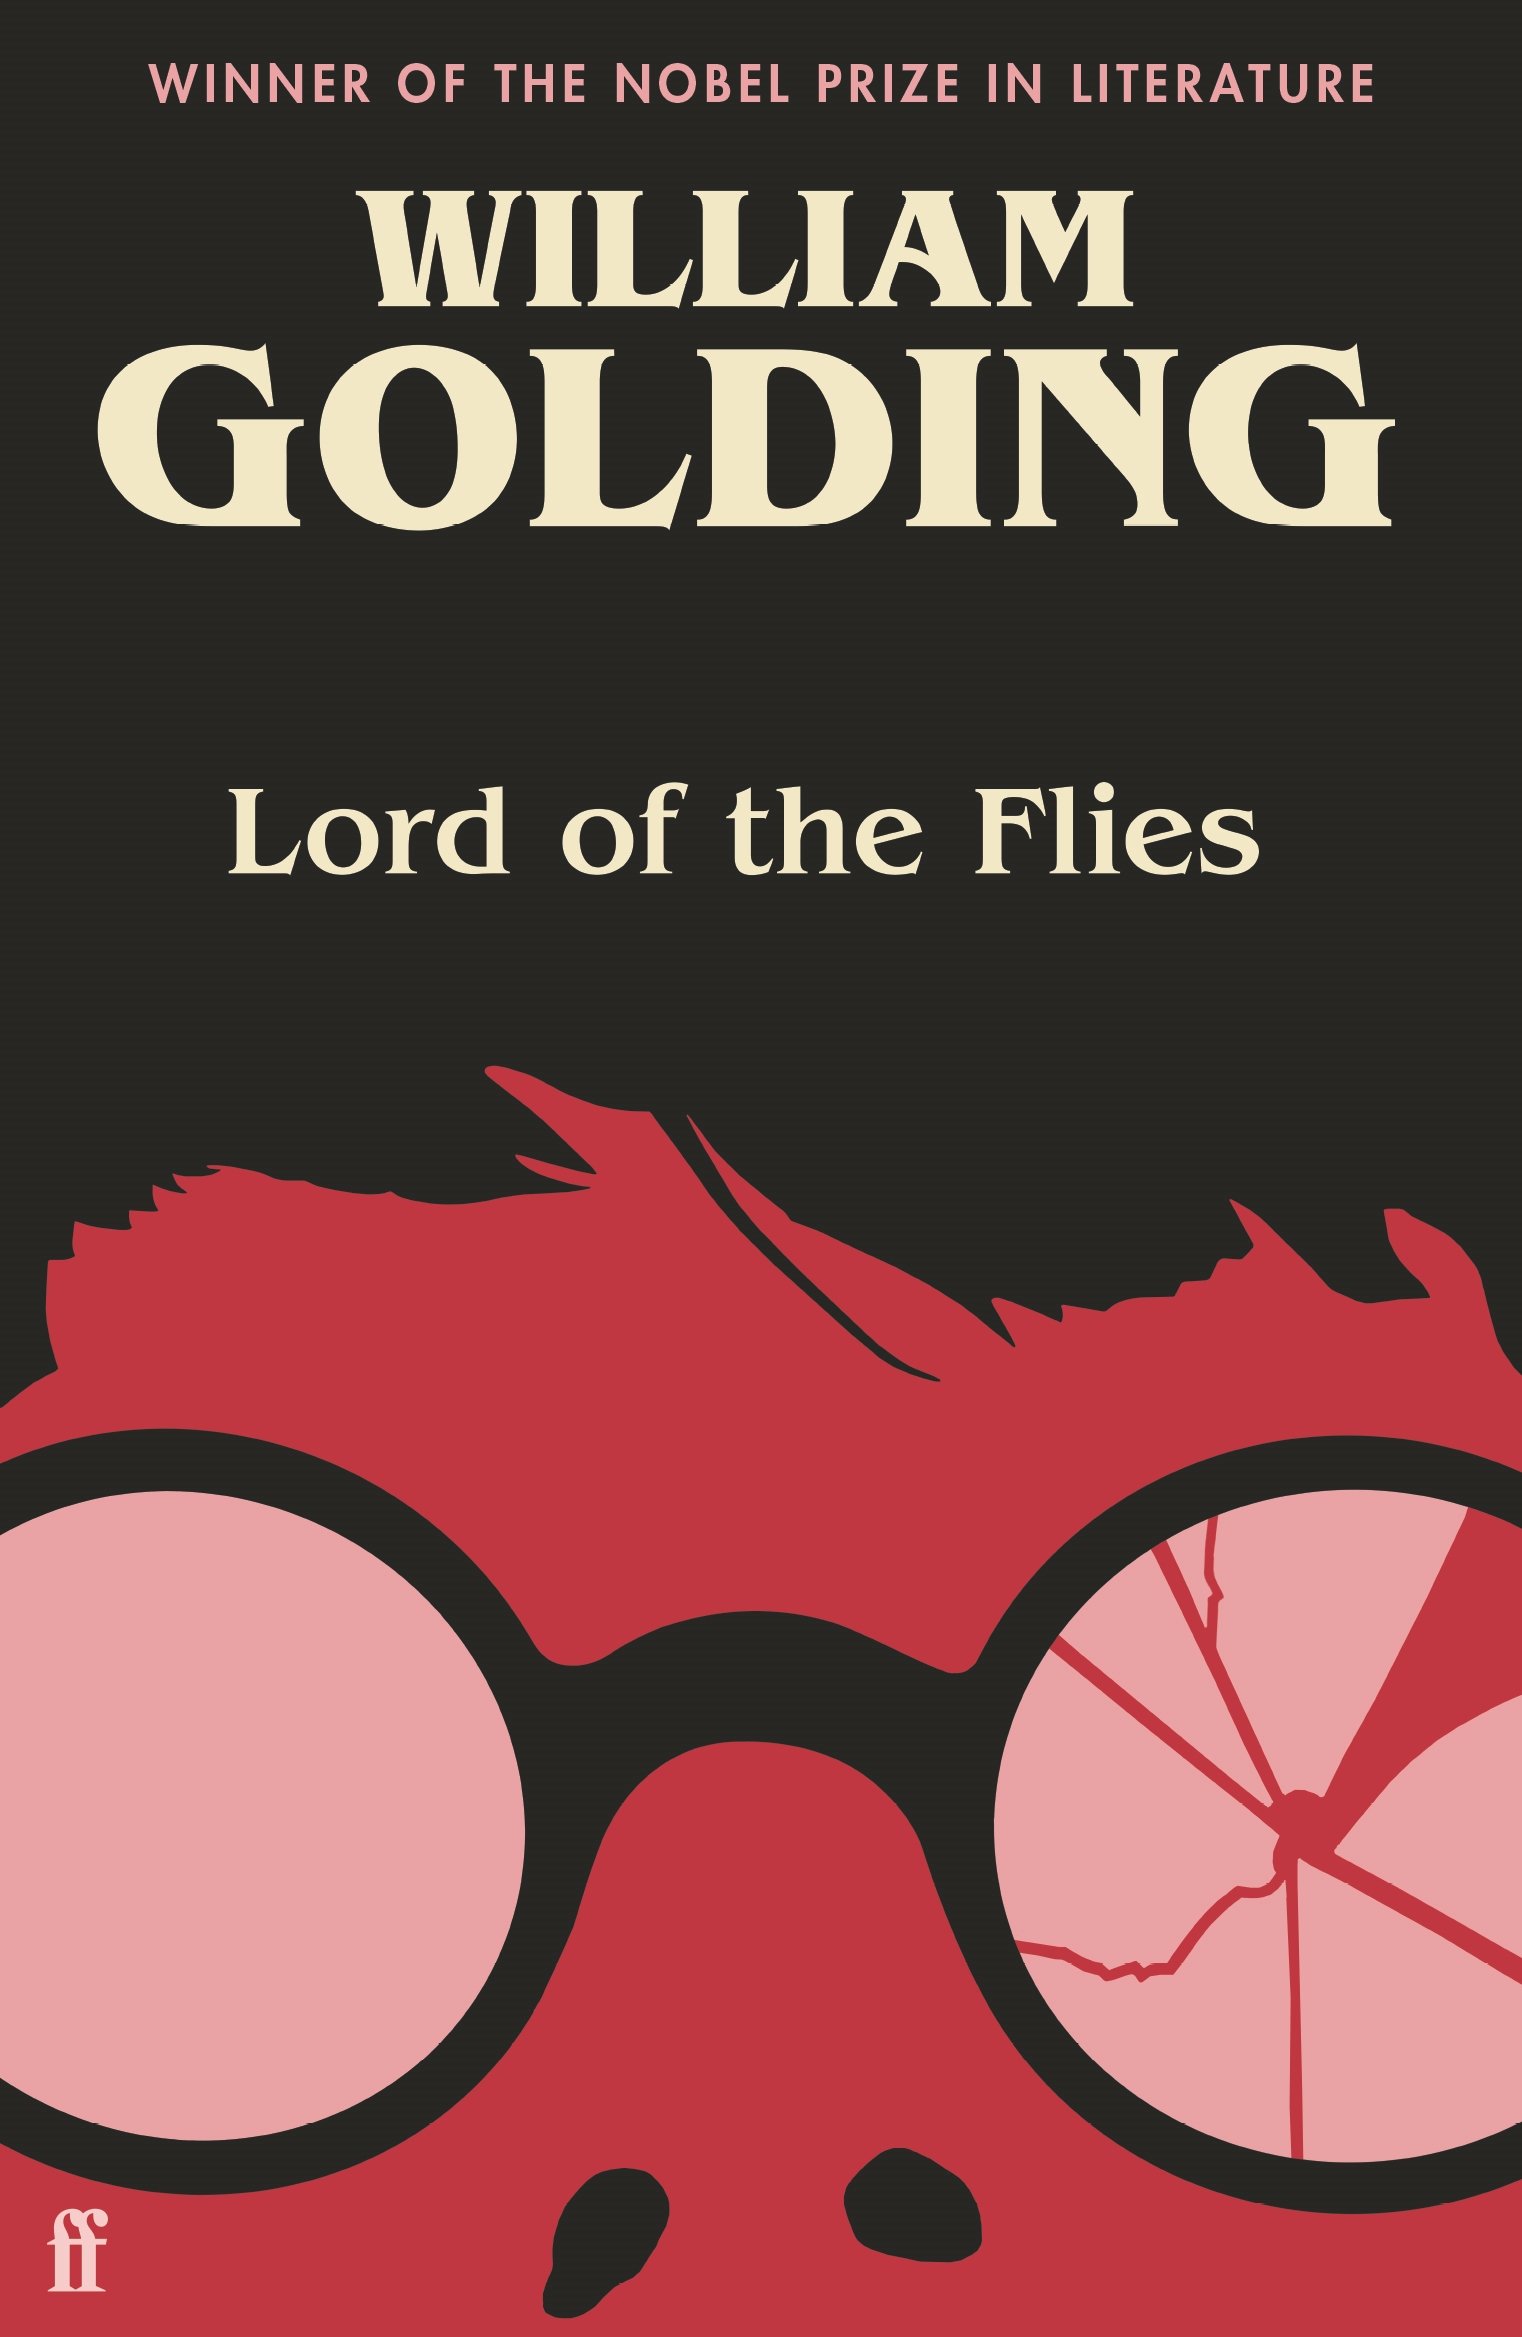 the lord of the flies book report